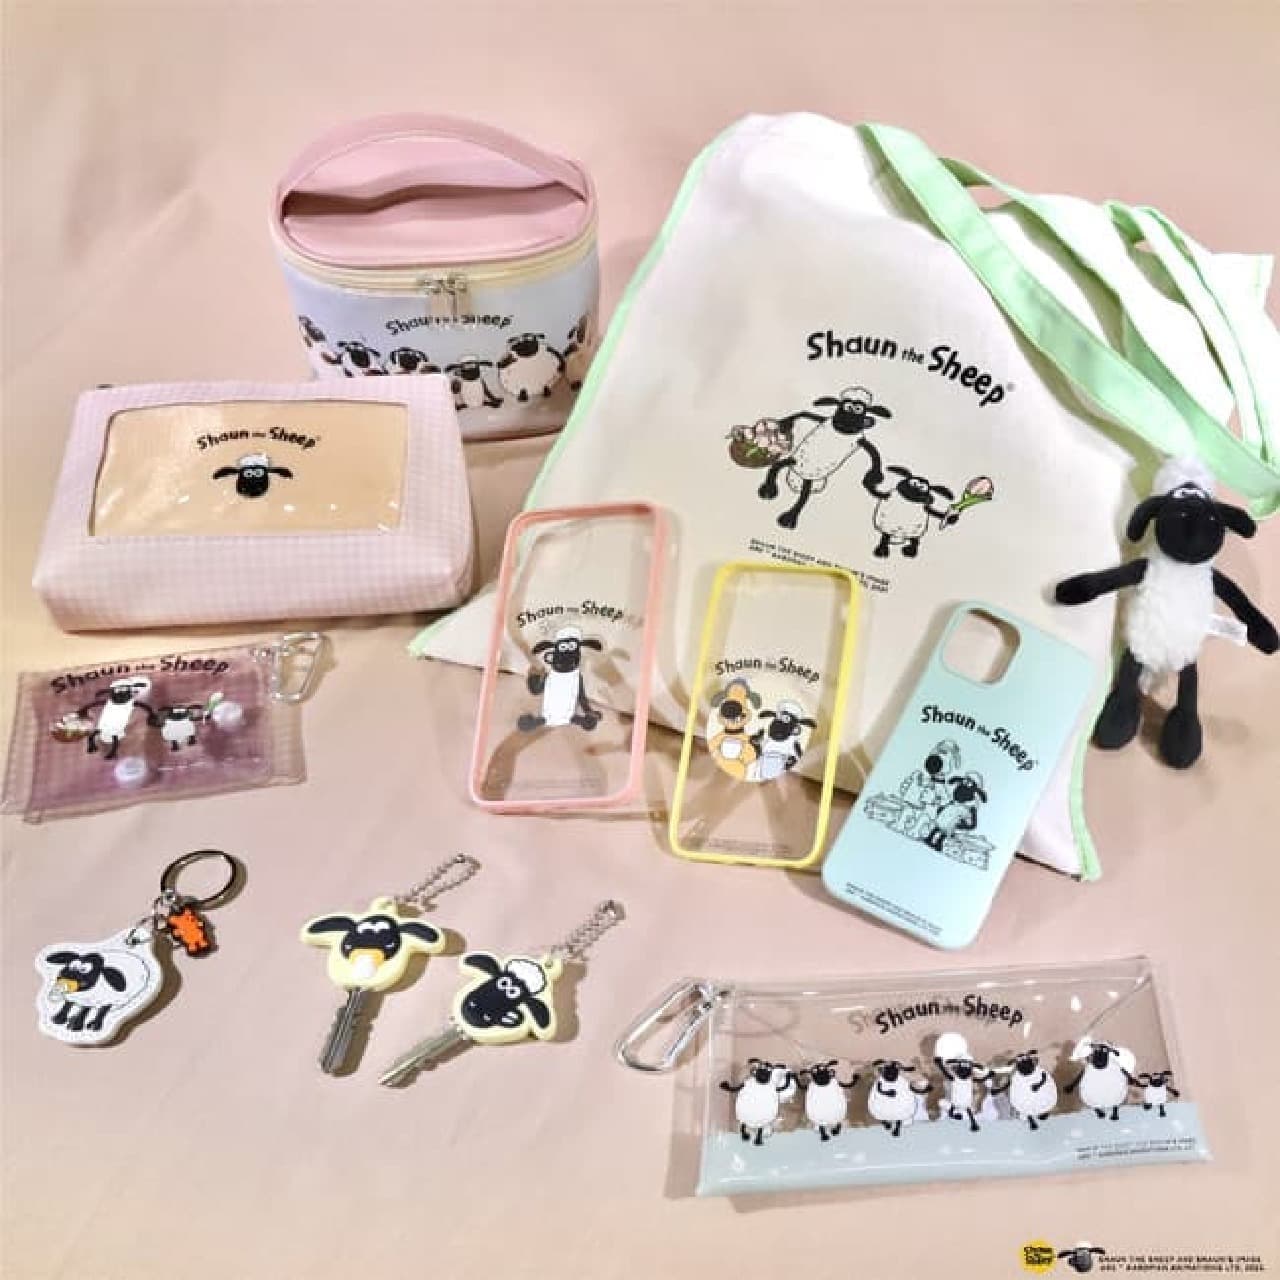 Collaboration of Thank You Mart x Shaun the Sheep --Pouch with cute dull color, iPhone case, etc.